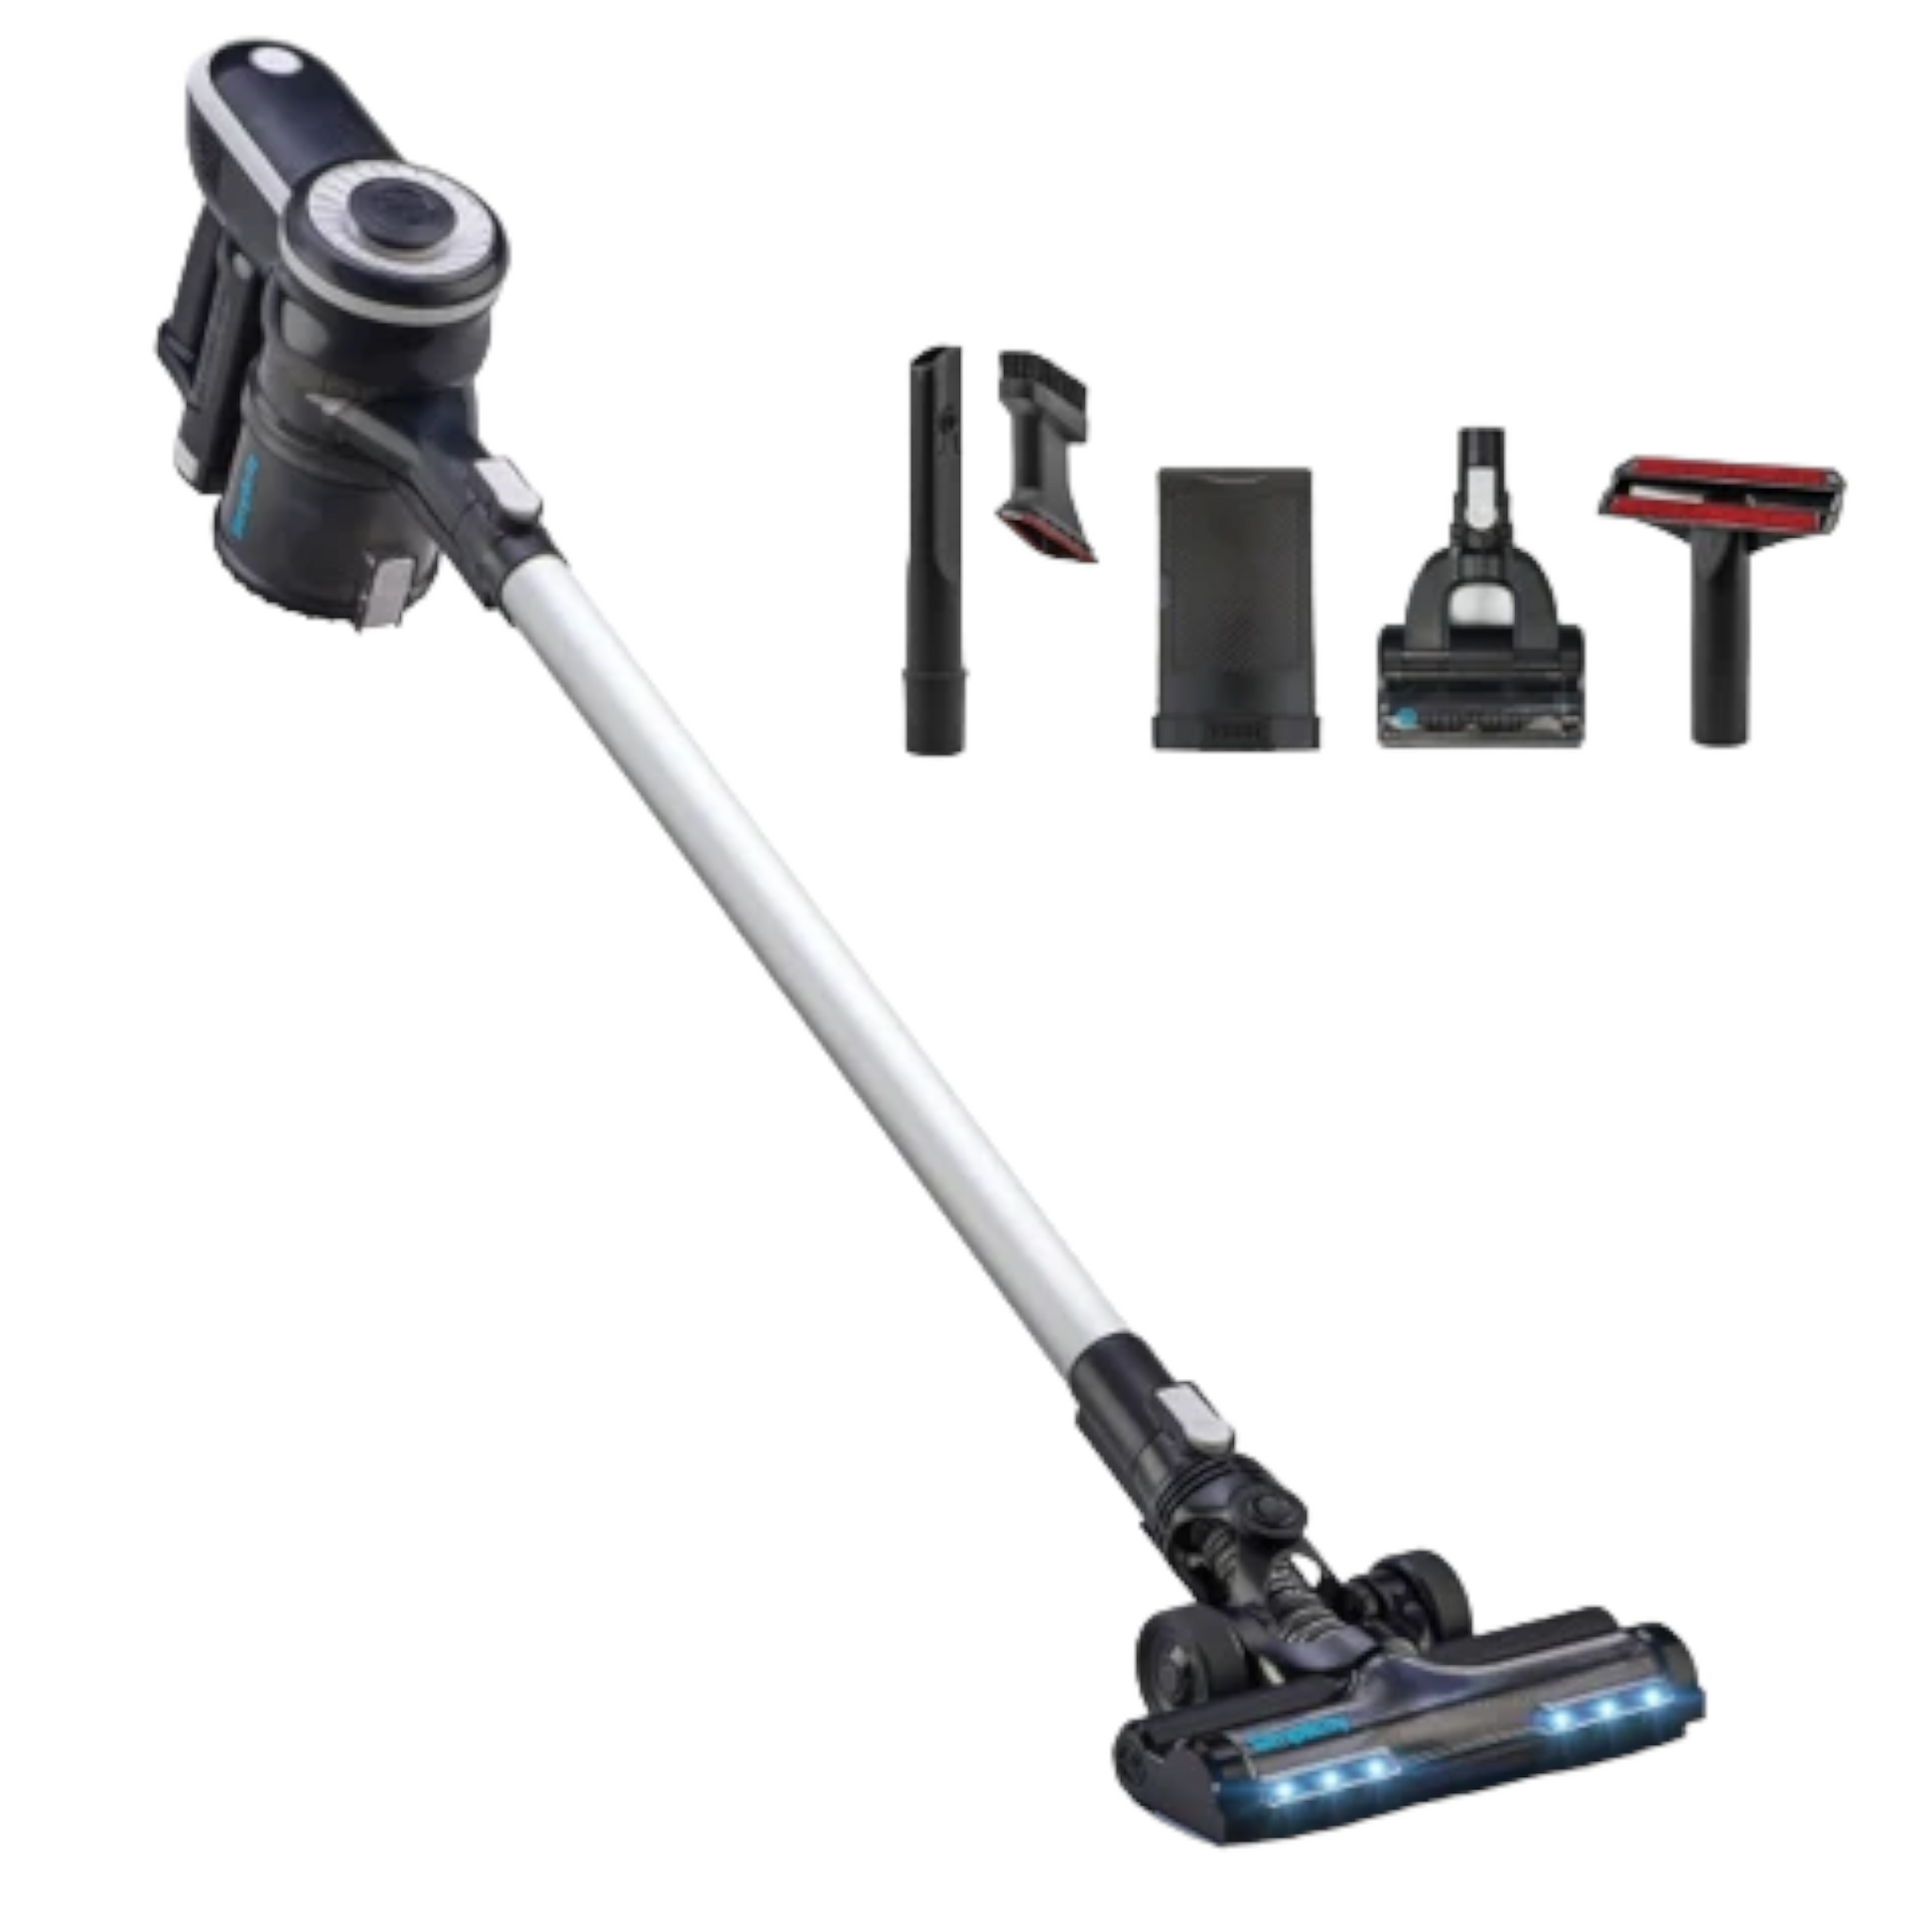 Cordless vs. Corded Vacuum: Which Should You Choose?